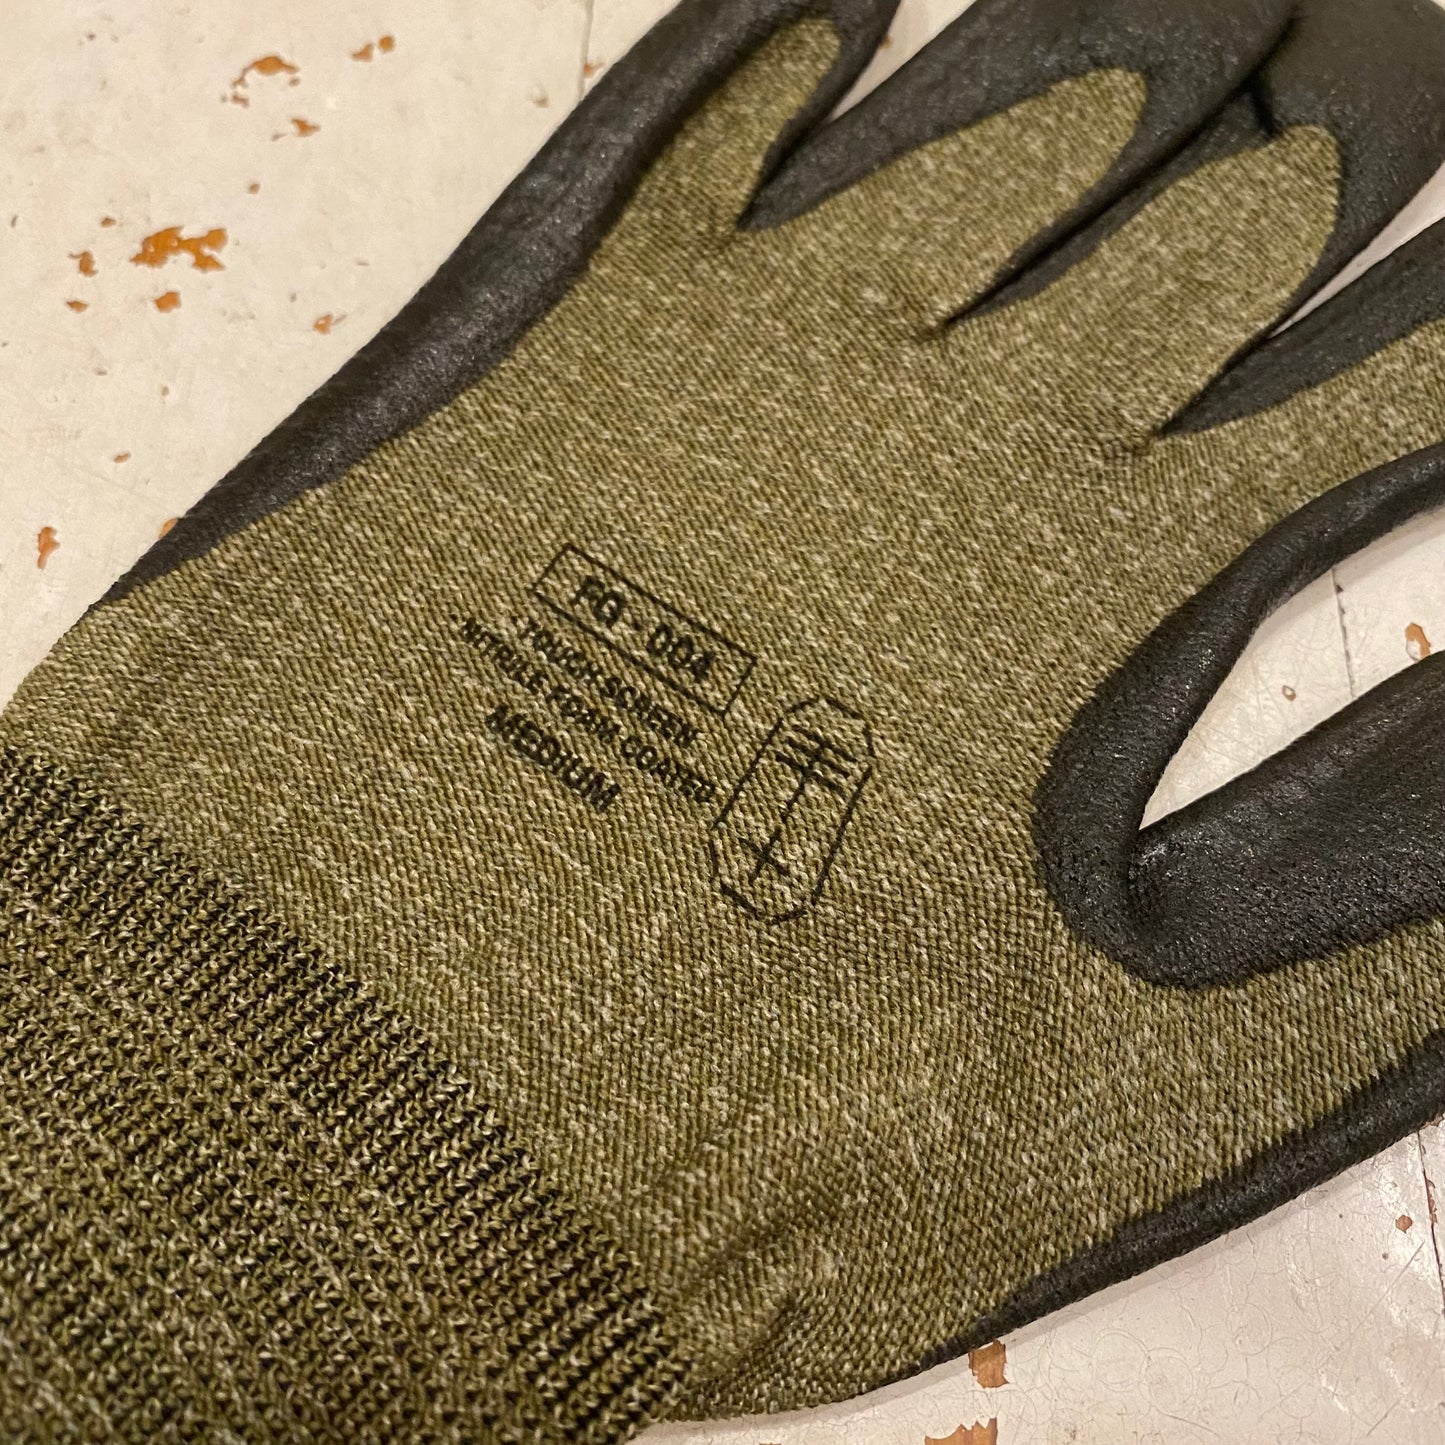 "WORKERS GLOVES"